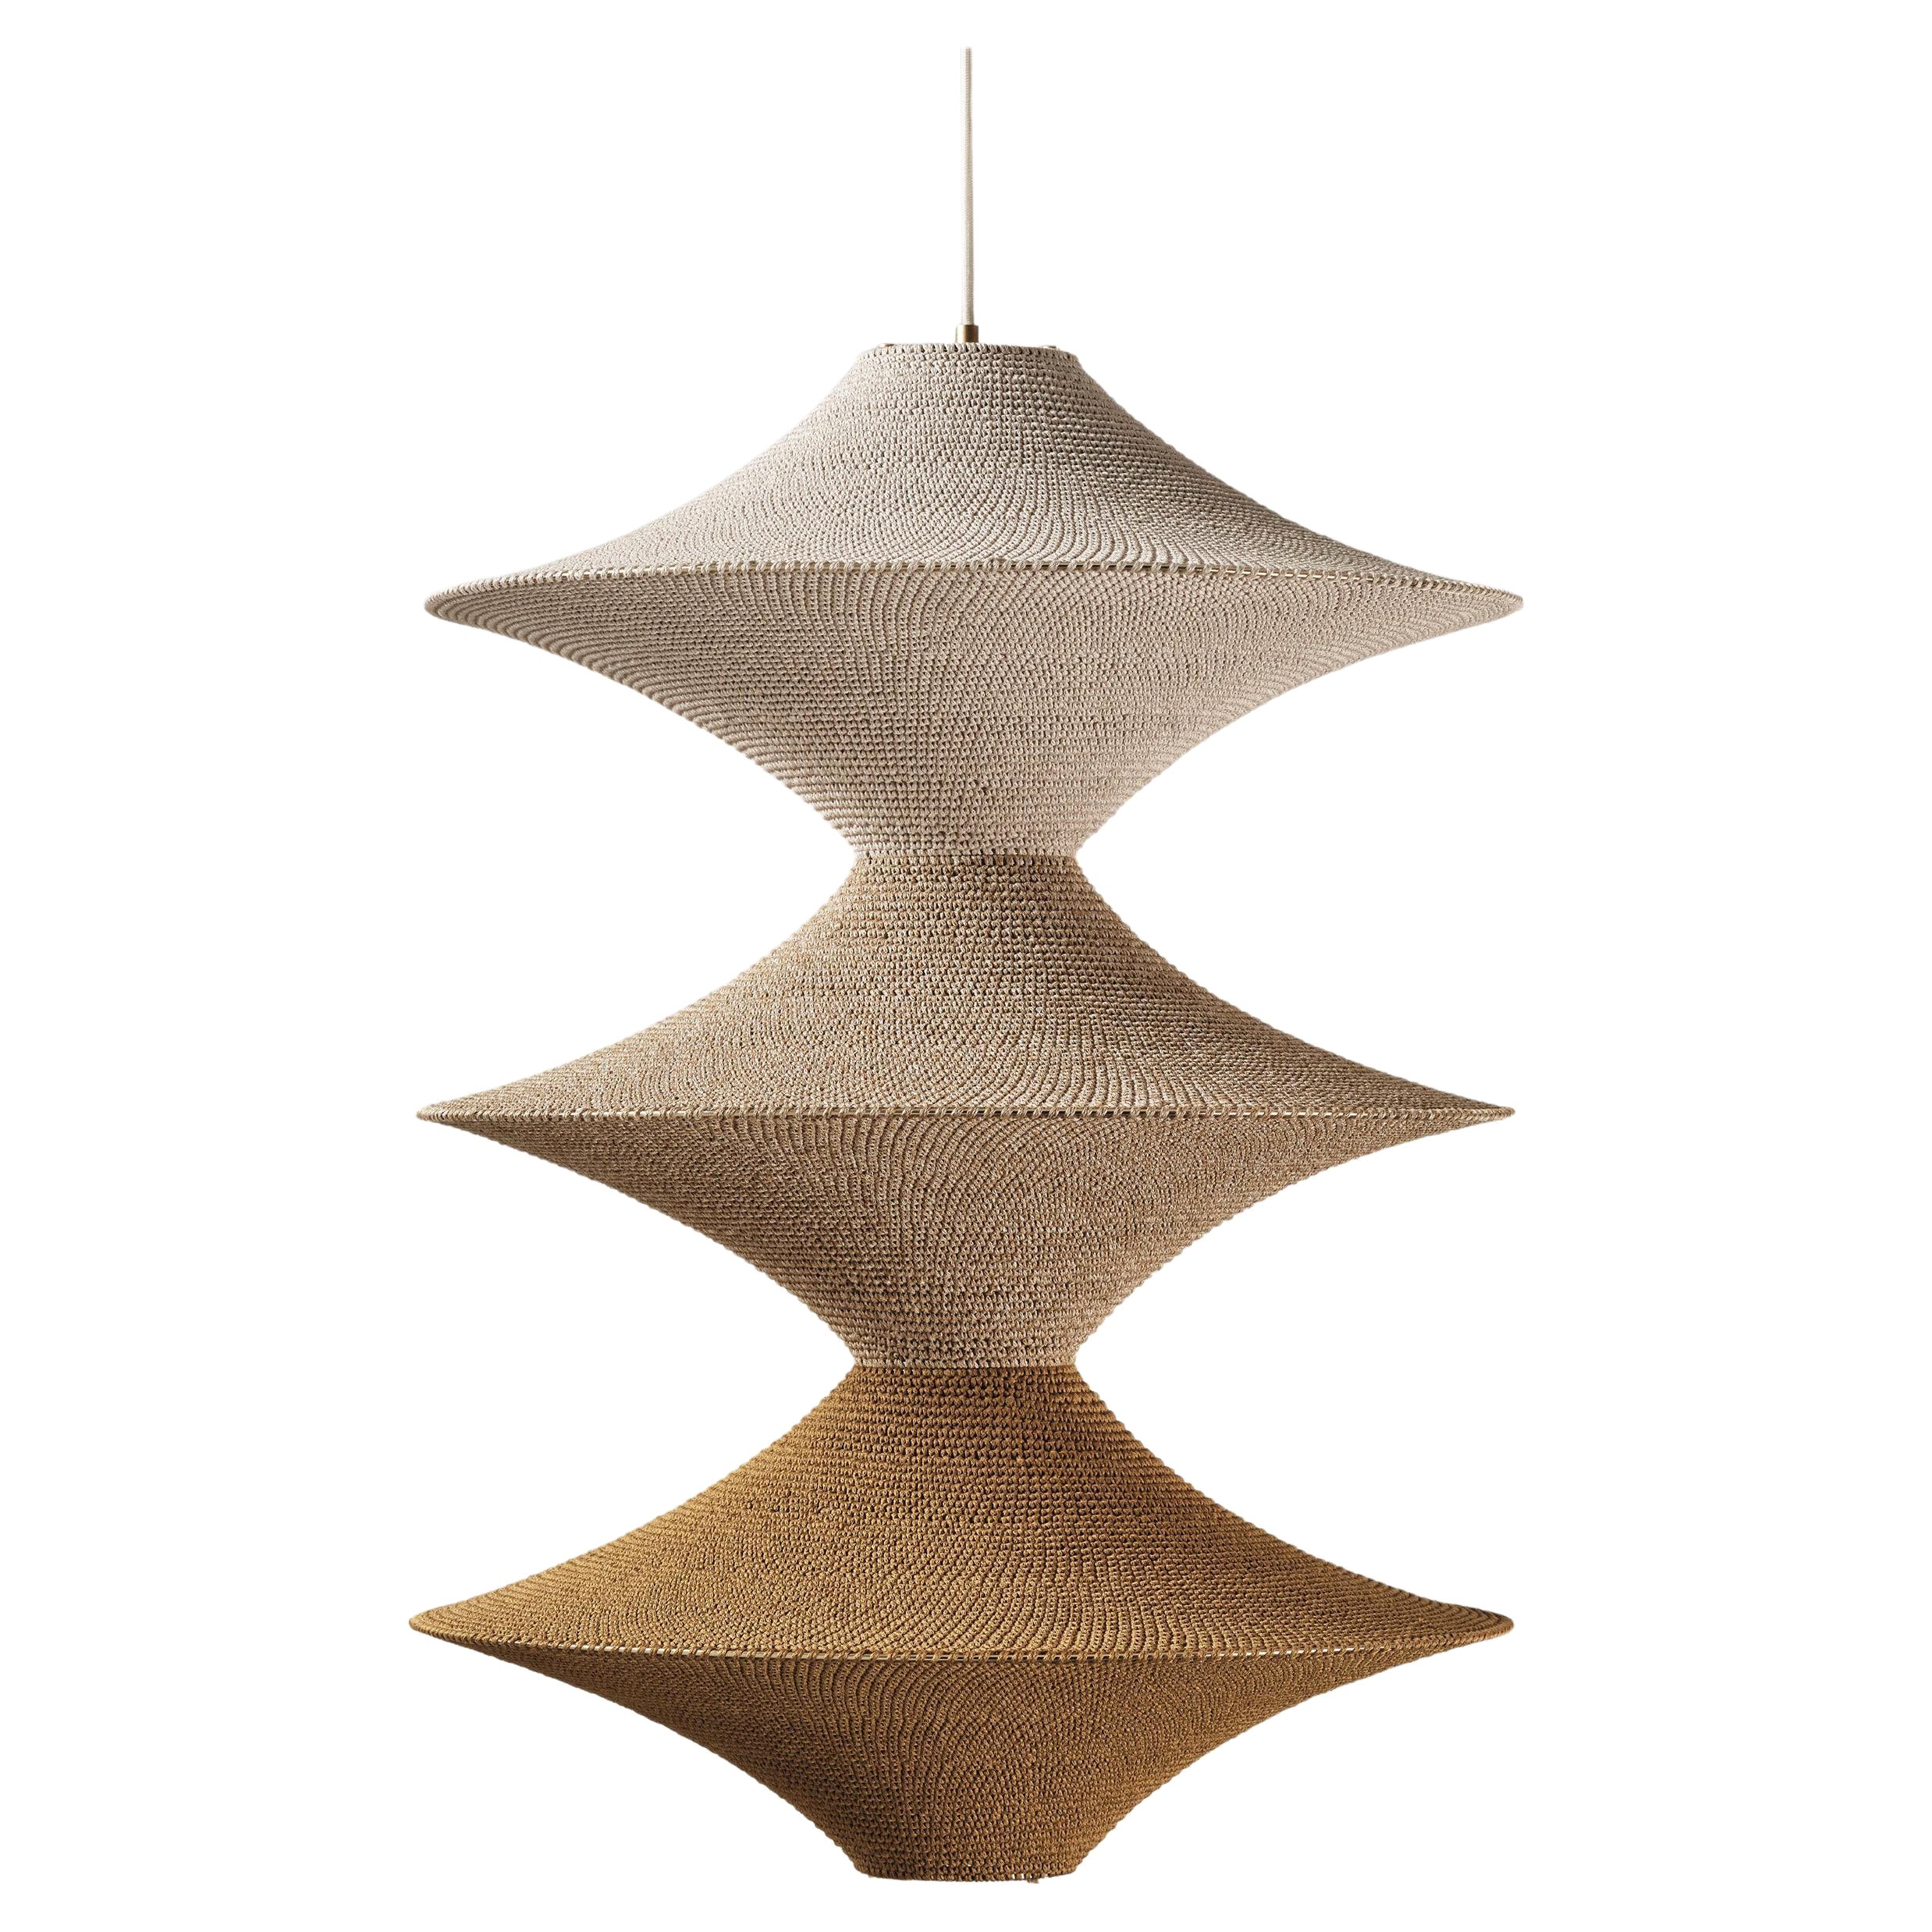 BAMBOO SOLITAIRE 03 Pendant Light Ø80cm/31.5in, Hand Crocheted in Bamboo Paper